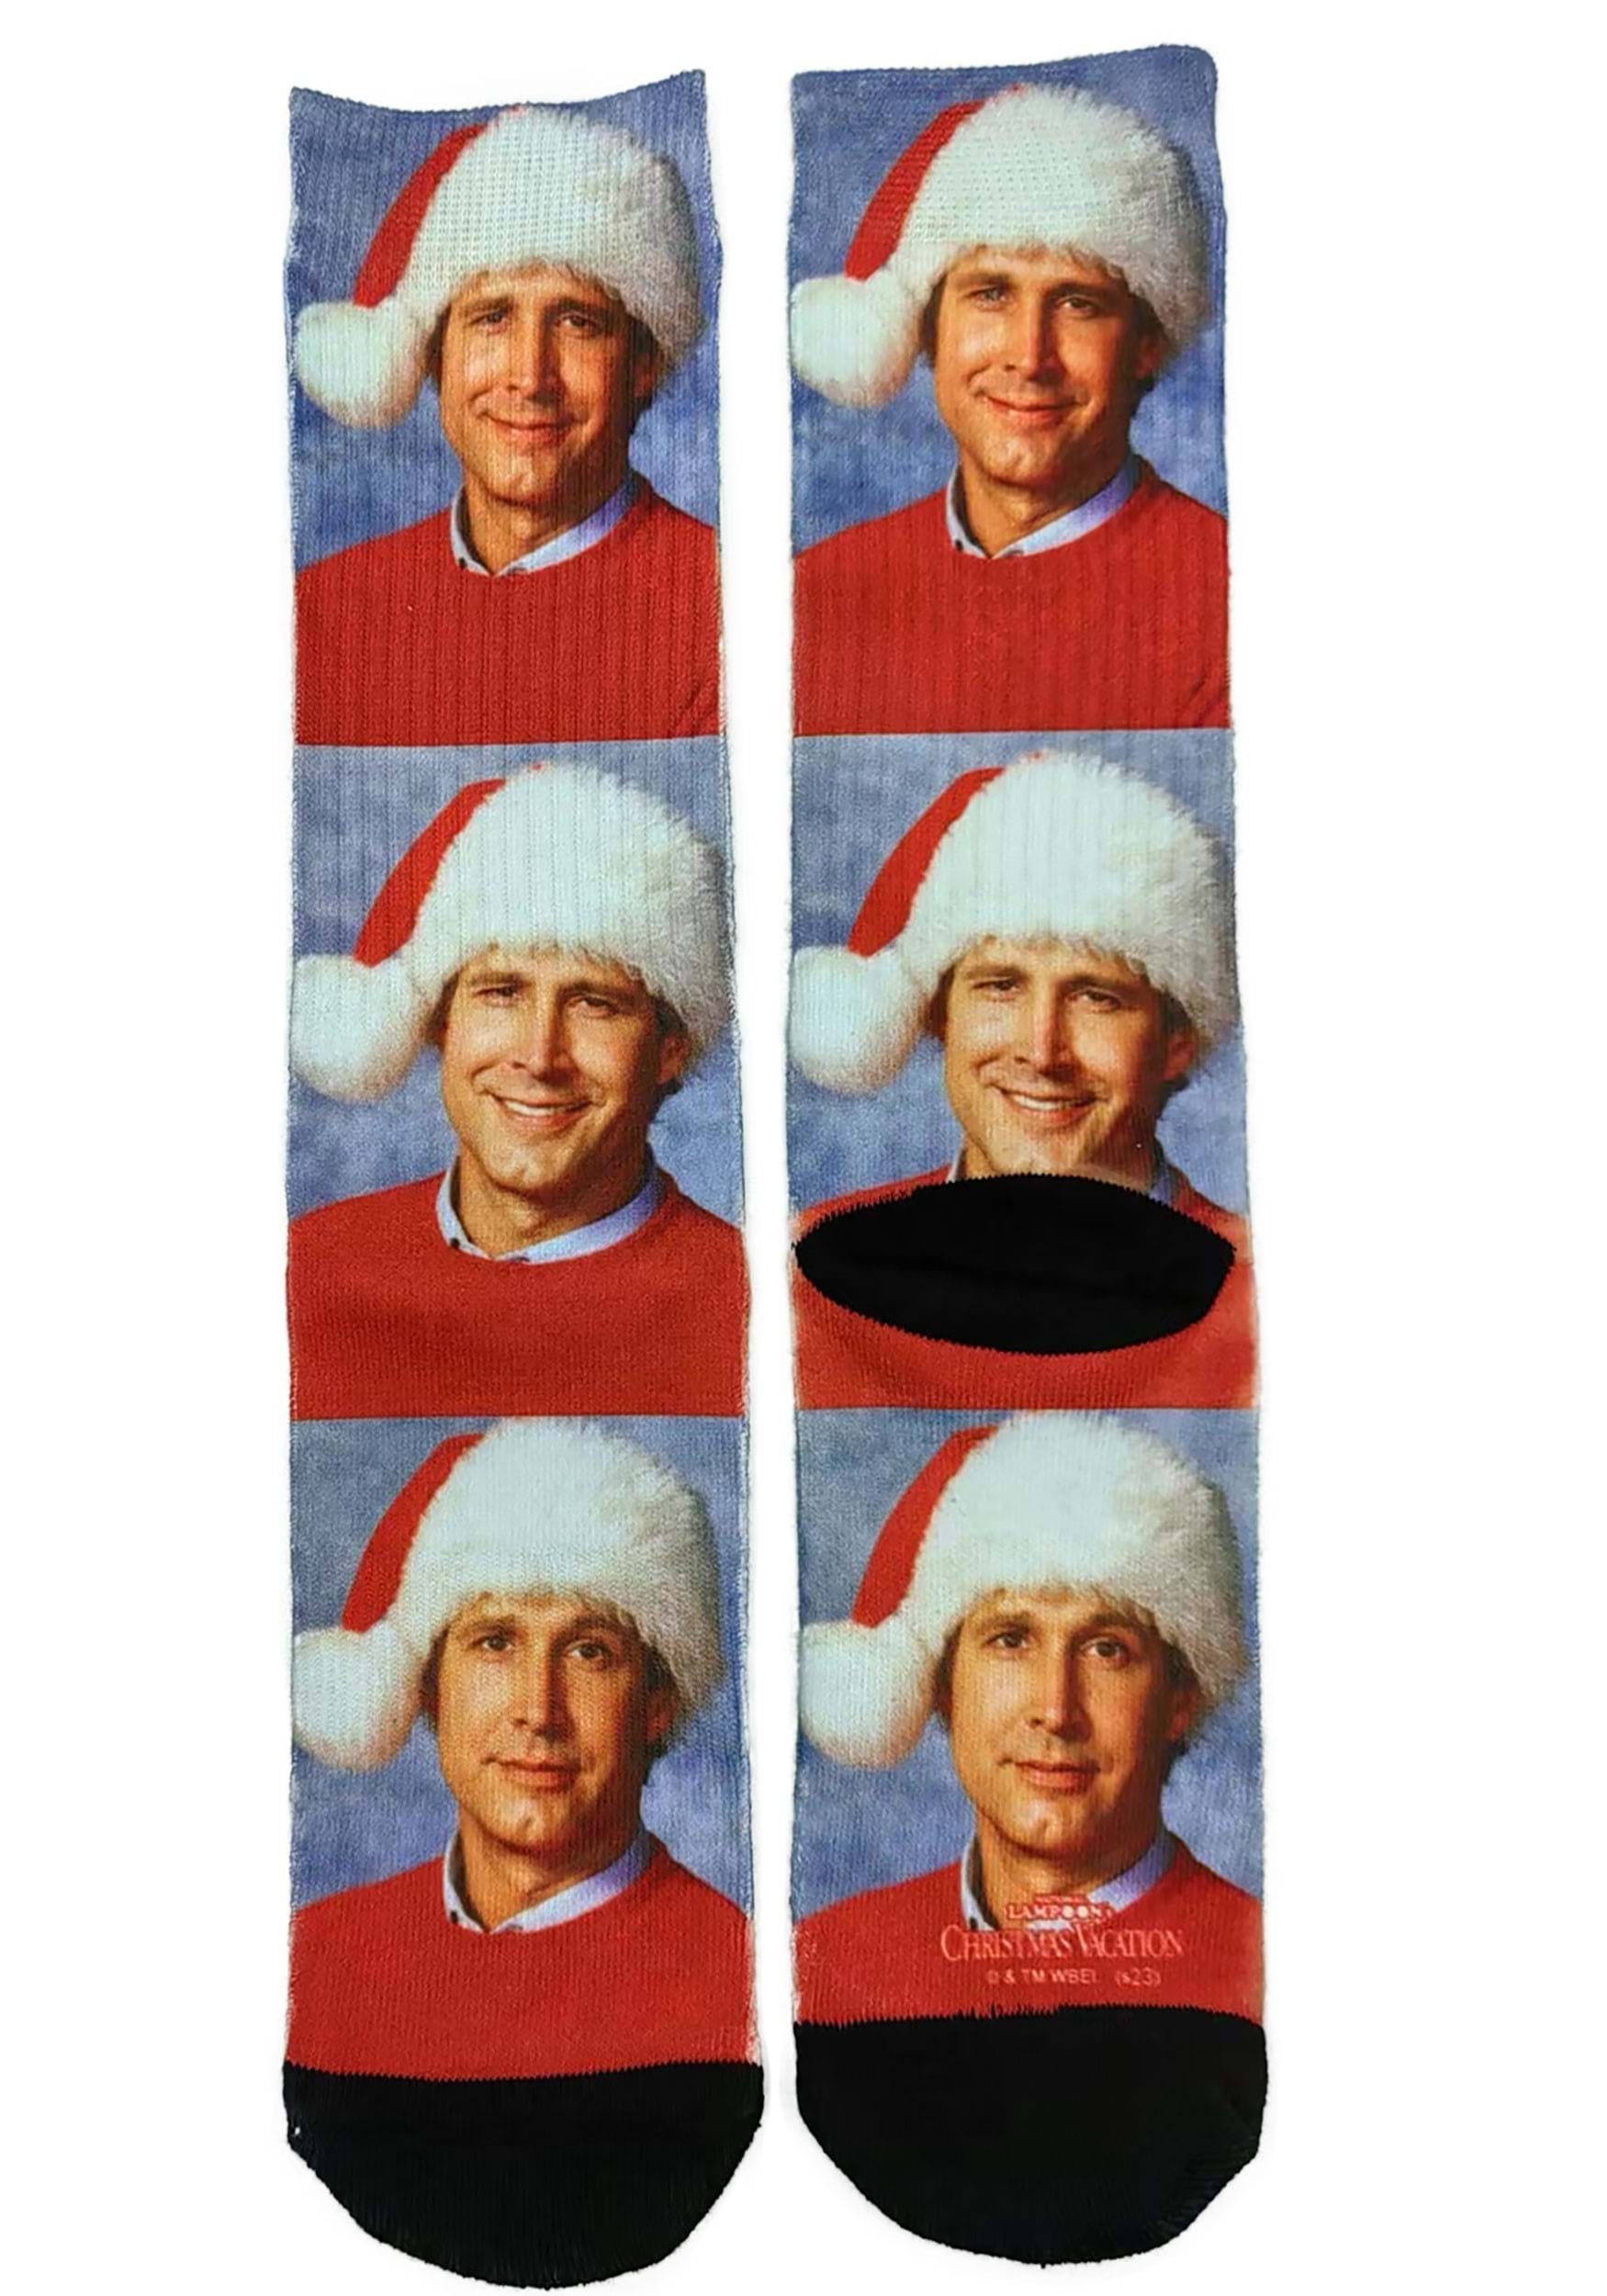 National Lampoons Christmas Vacation Glamour Shot Socks for Adults